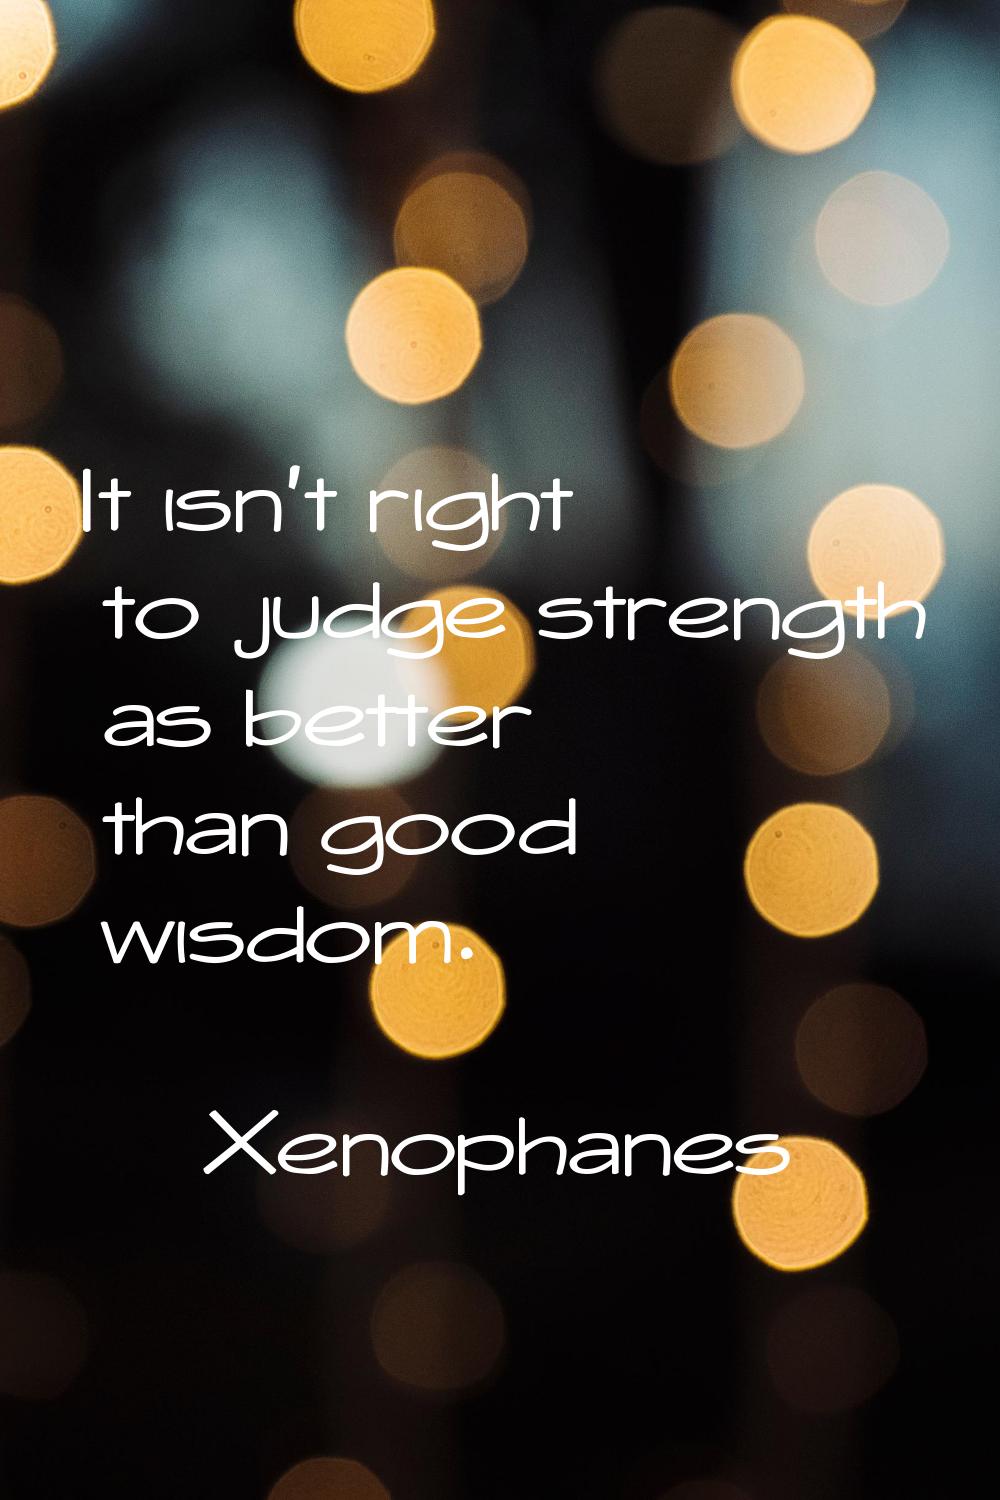 It isn't right to judge strength as better than good wisdom.